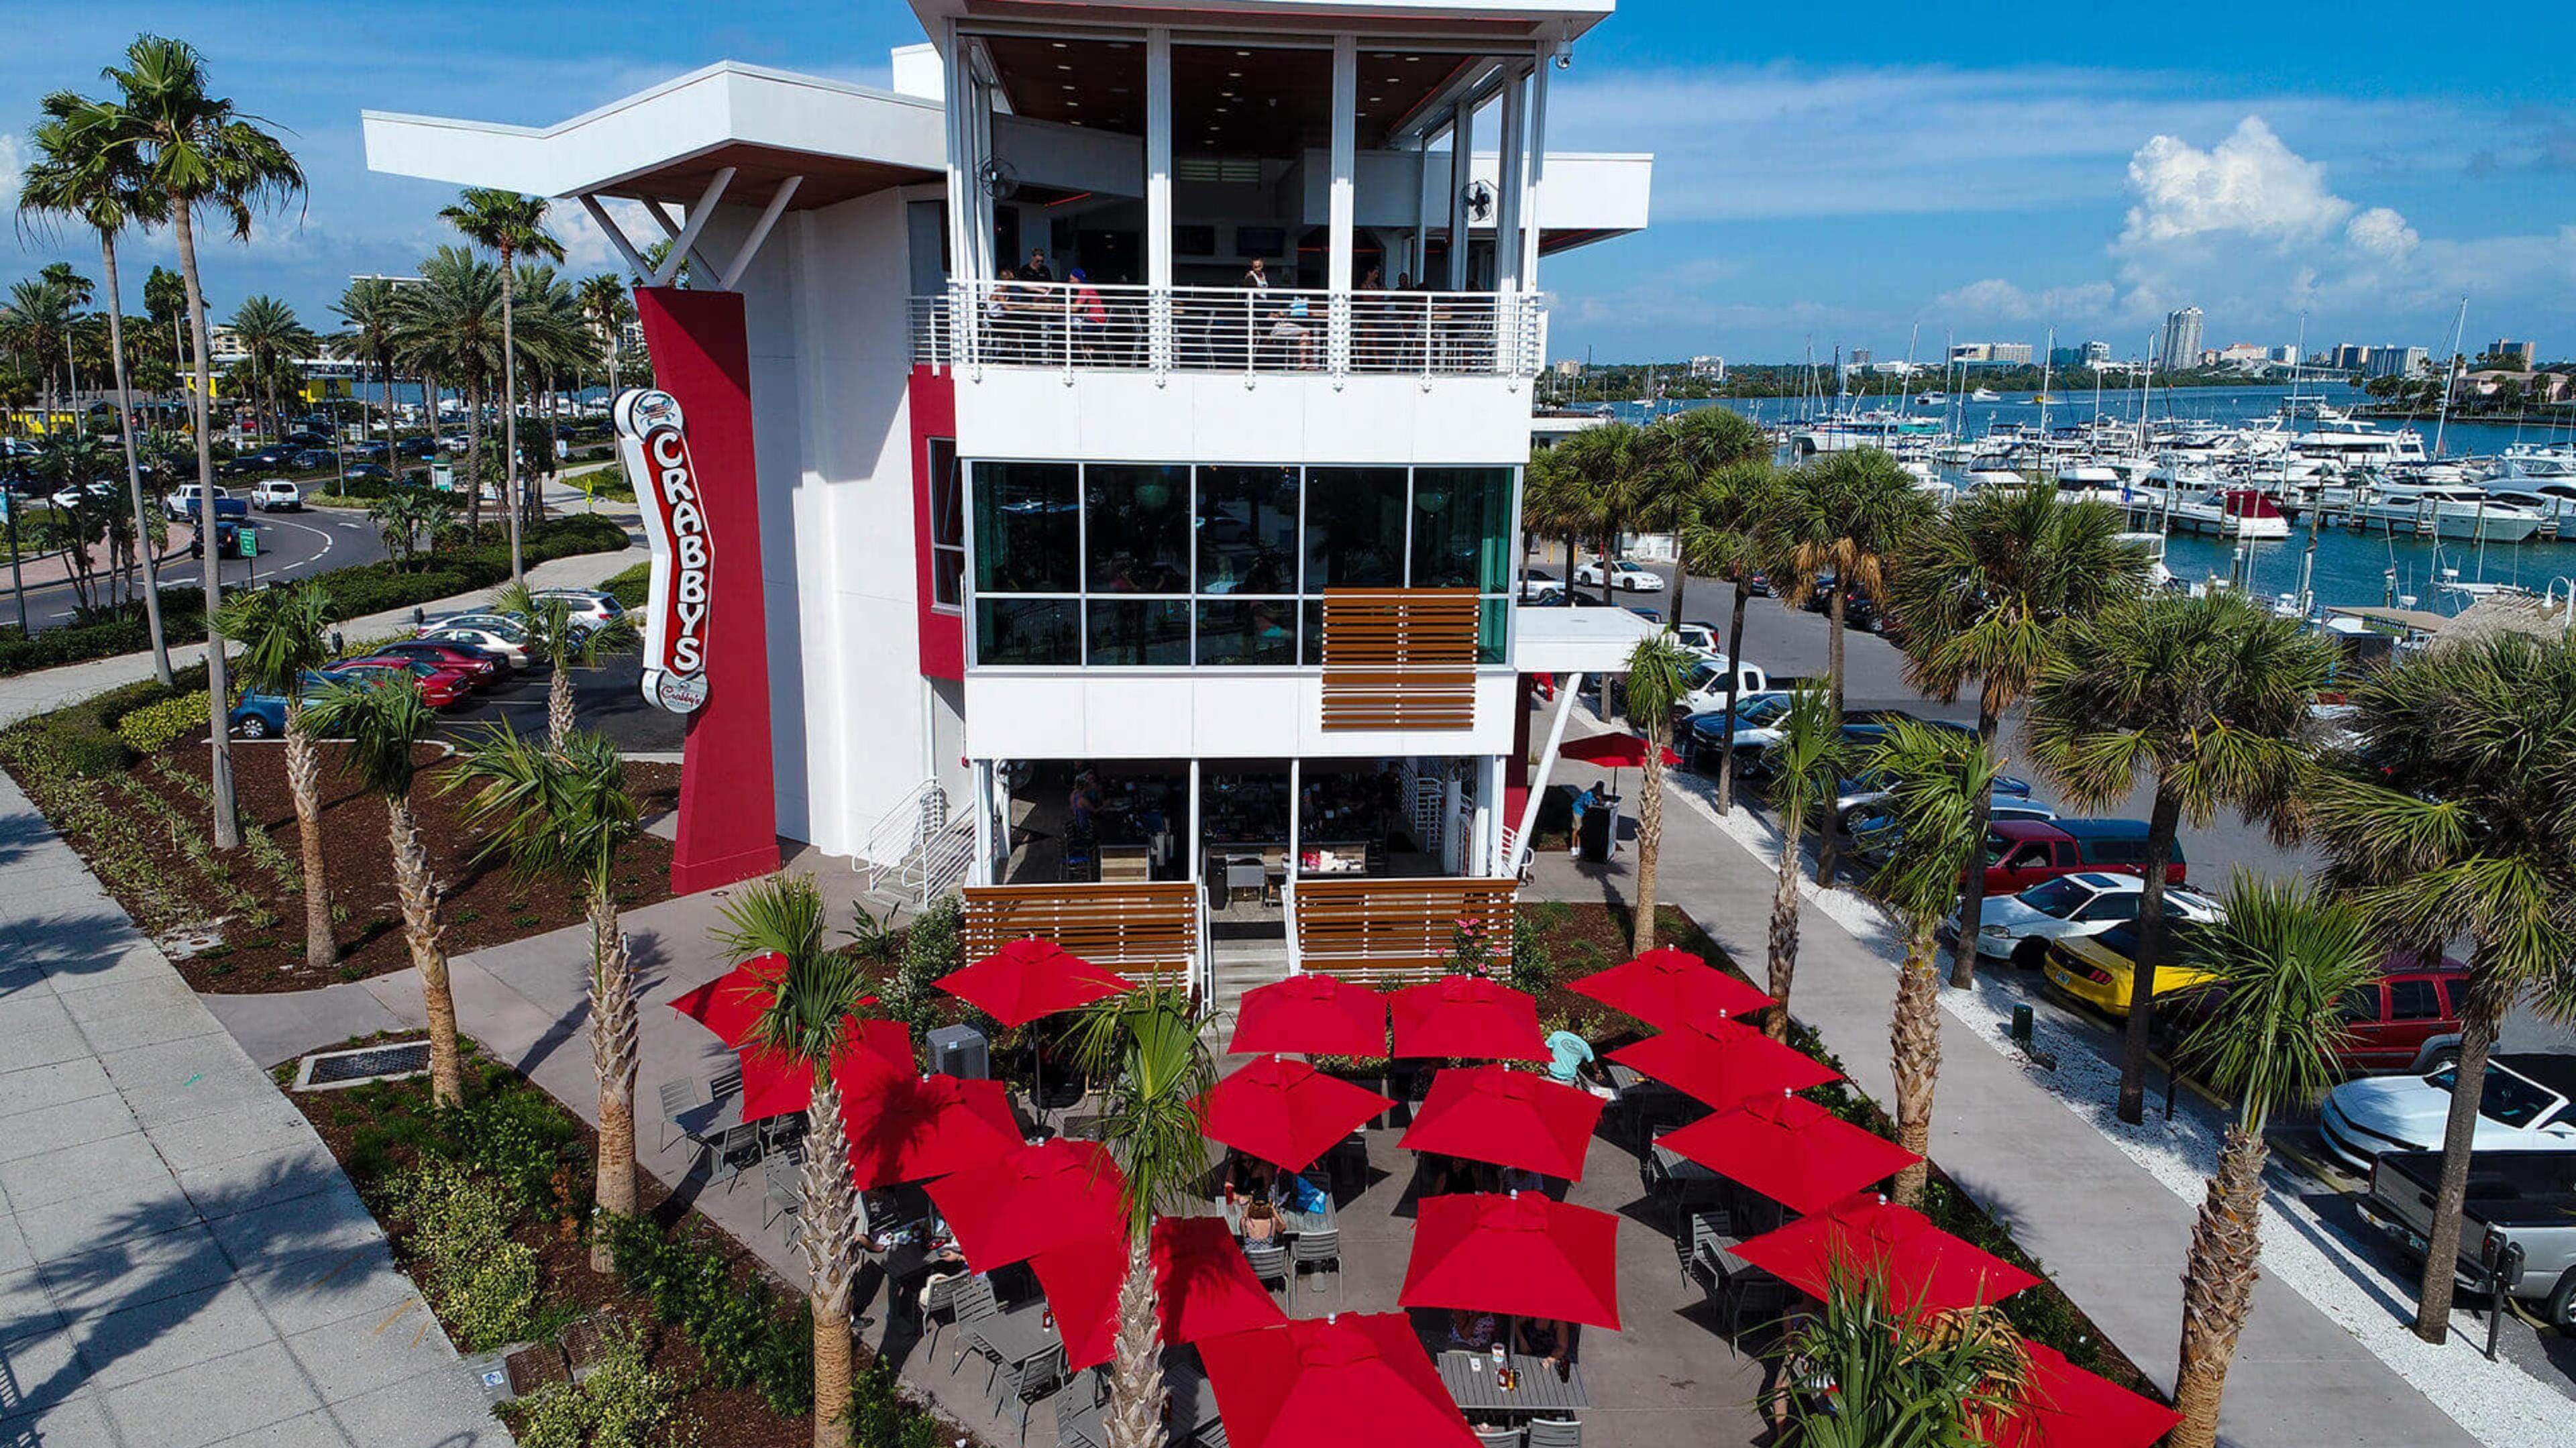 Crabby's Dockside Clearwater